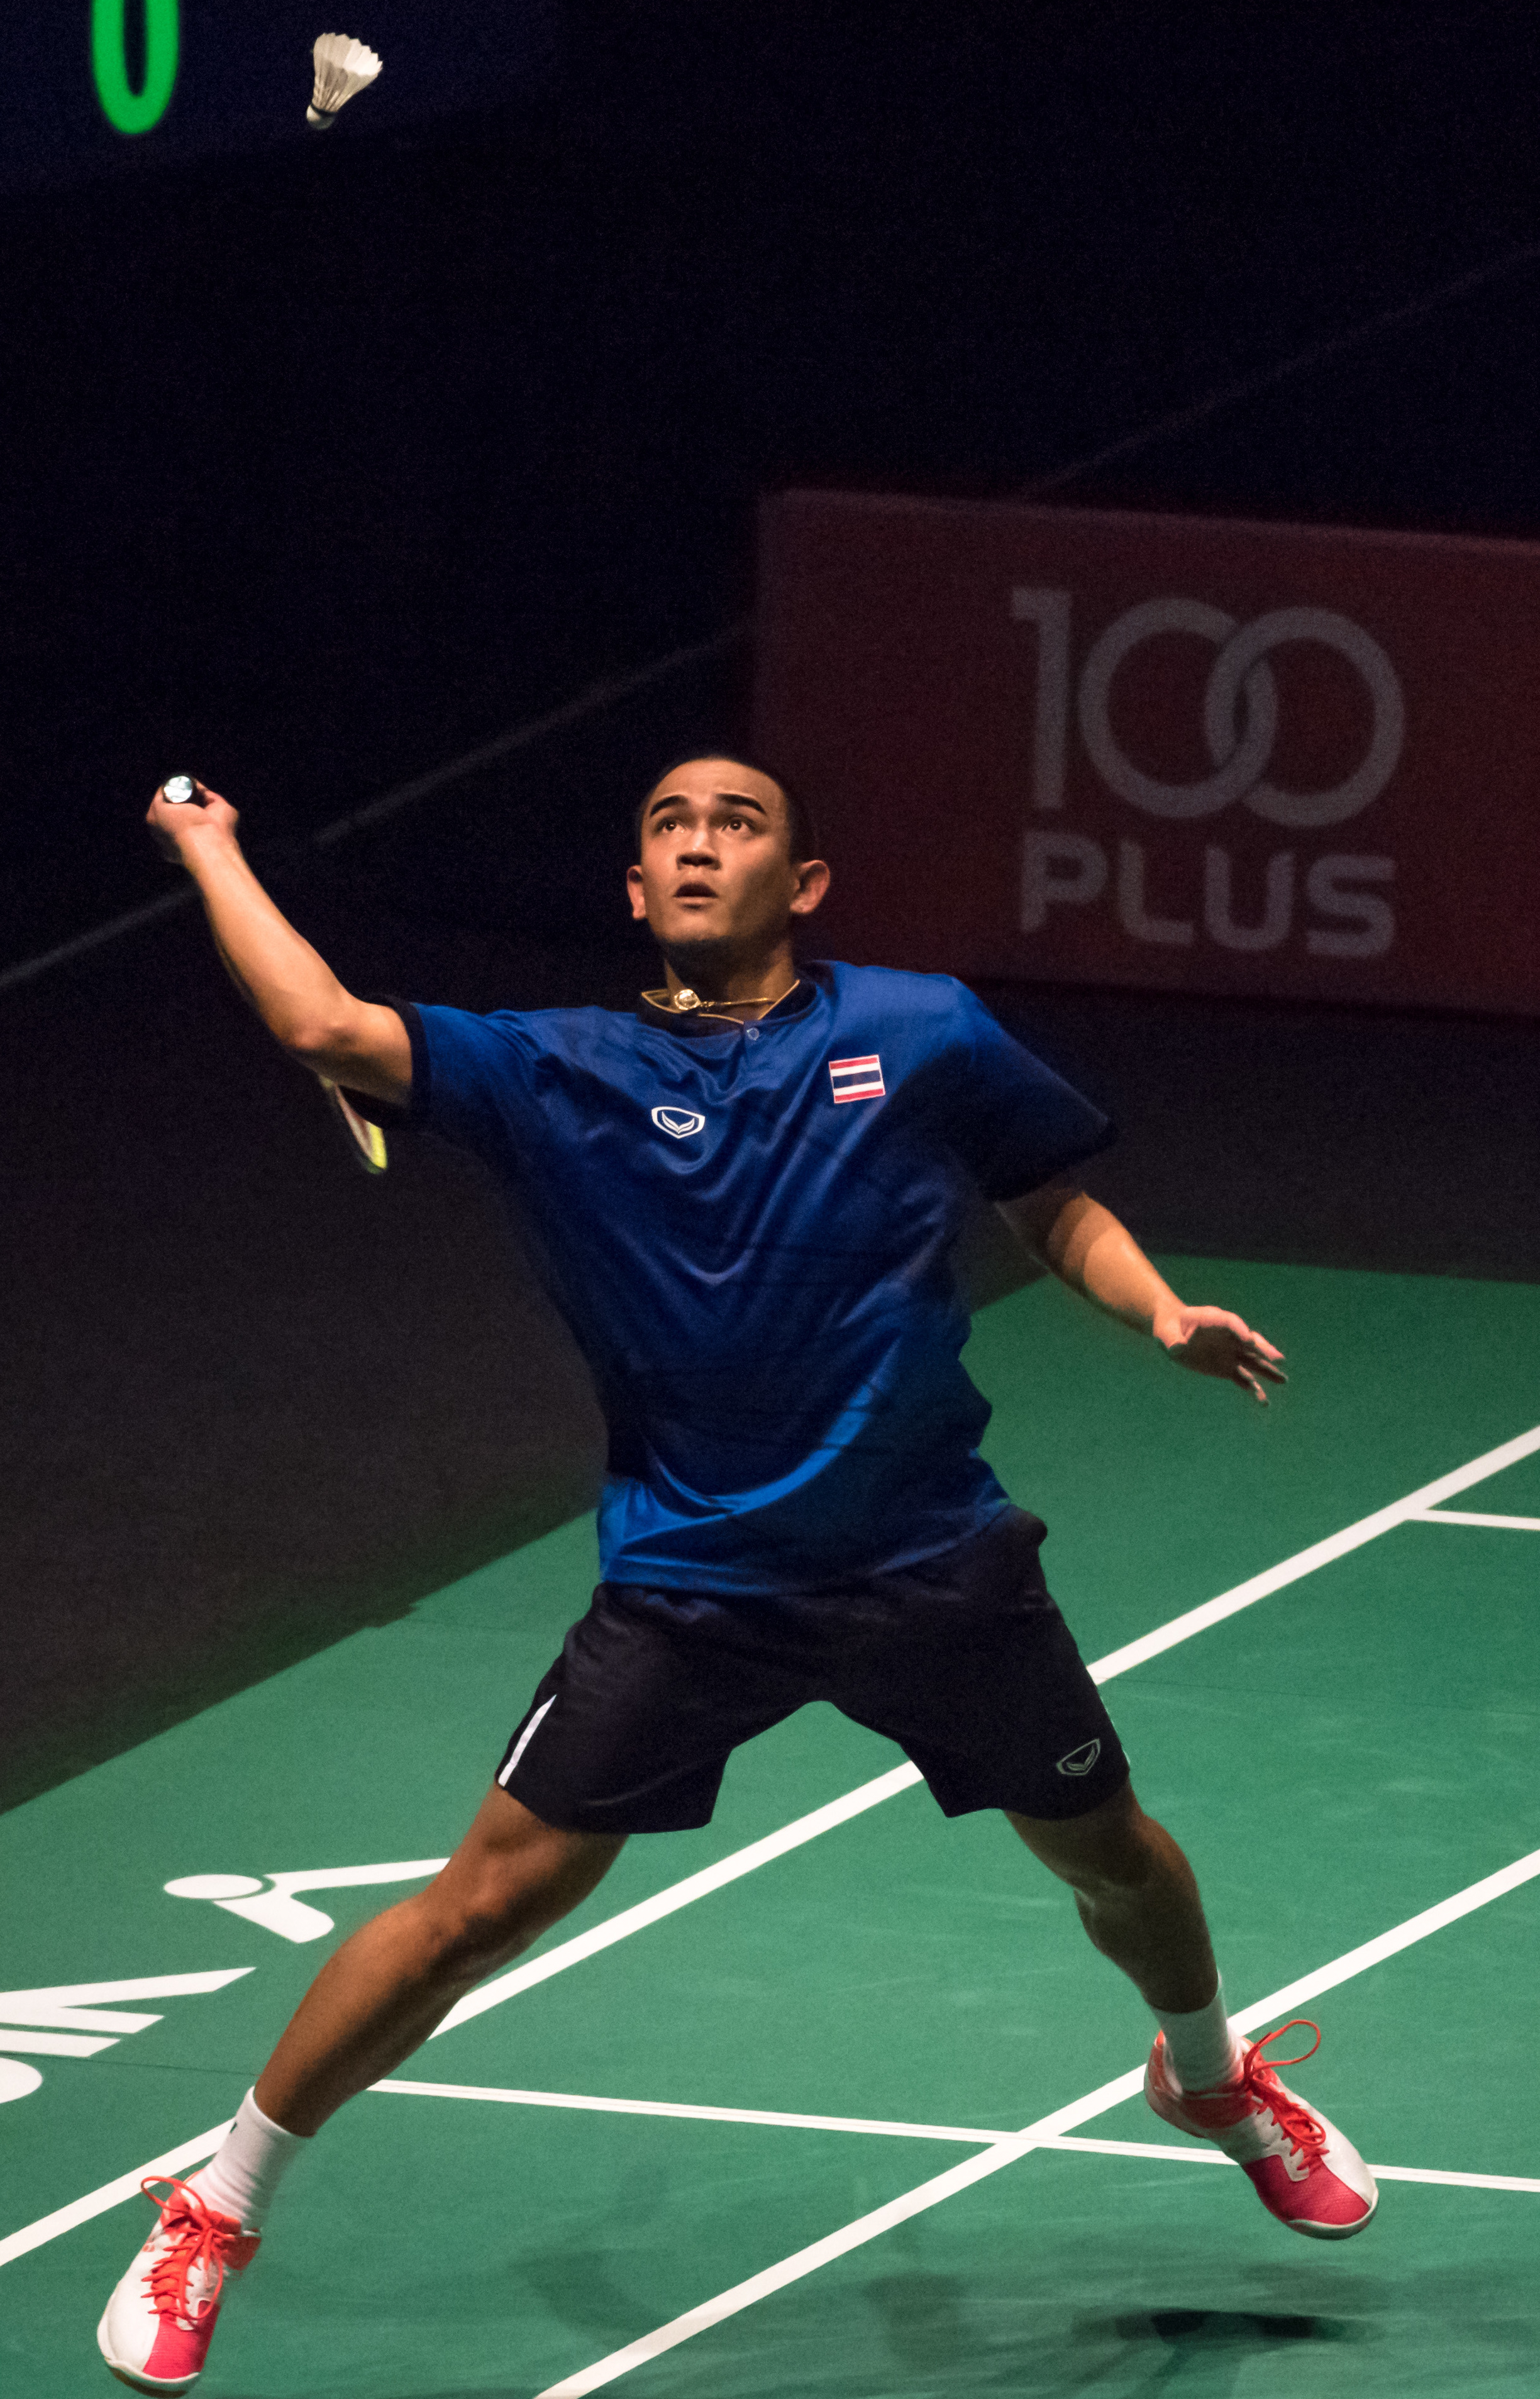 Badminton Tips and Tricks #7 – How To Improve Control